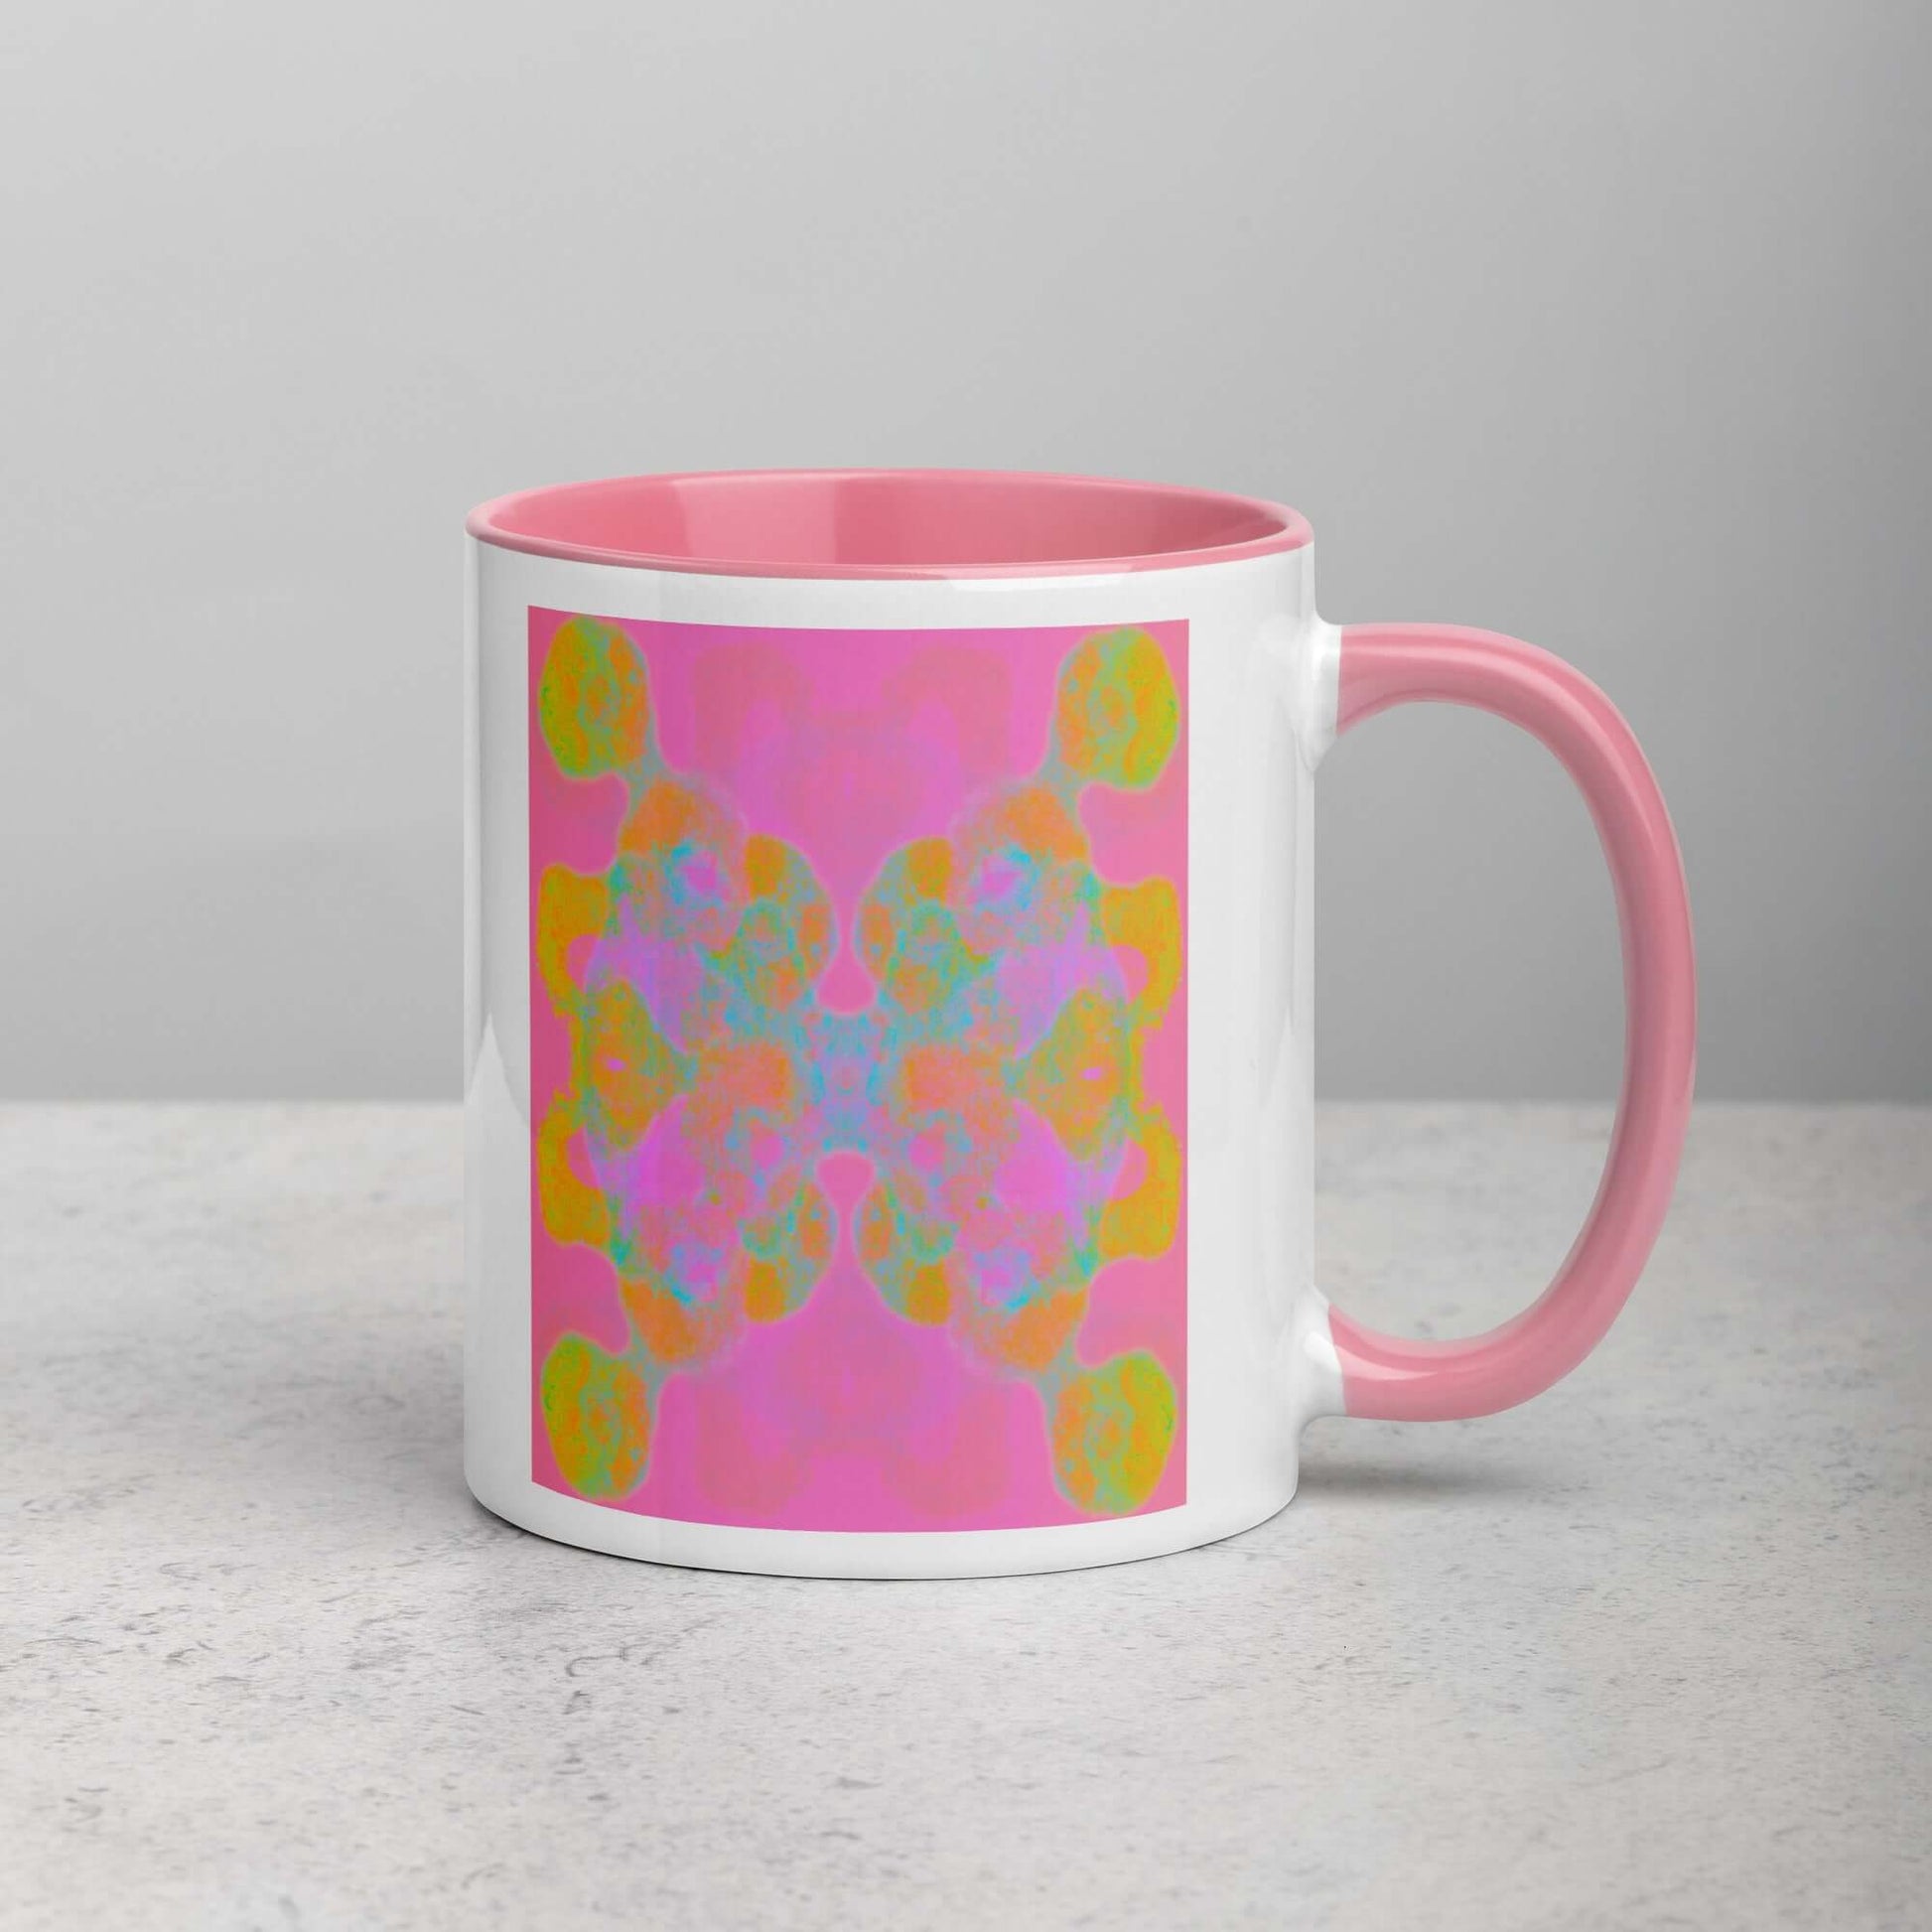 Colorful Abstract Butterfly Shape on Pink Background “Double the Fun” Abstract Art Mug with Light Pink Color Inside Right Handed Front View